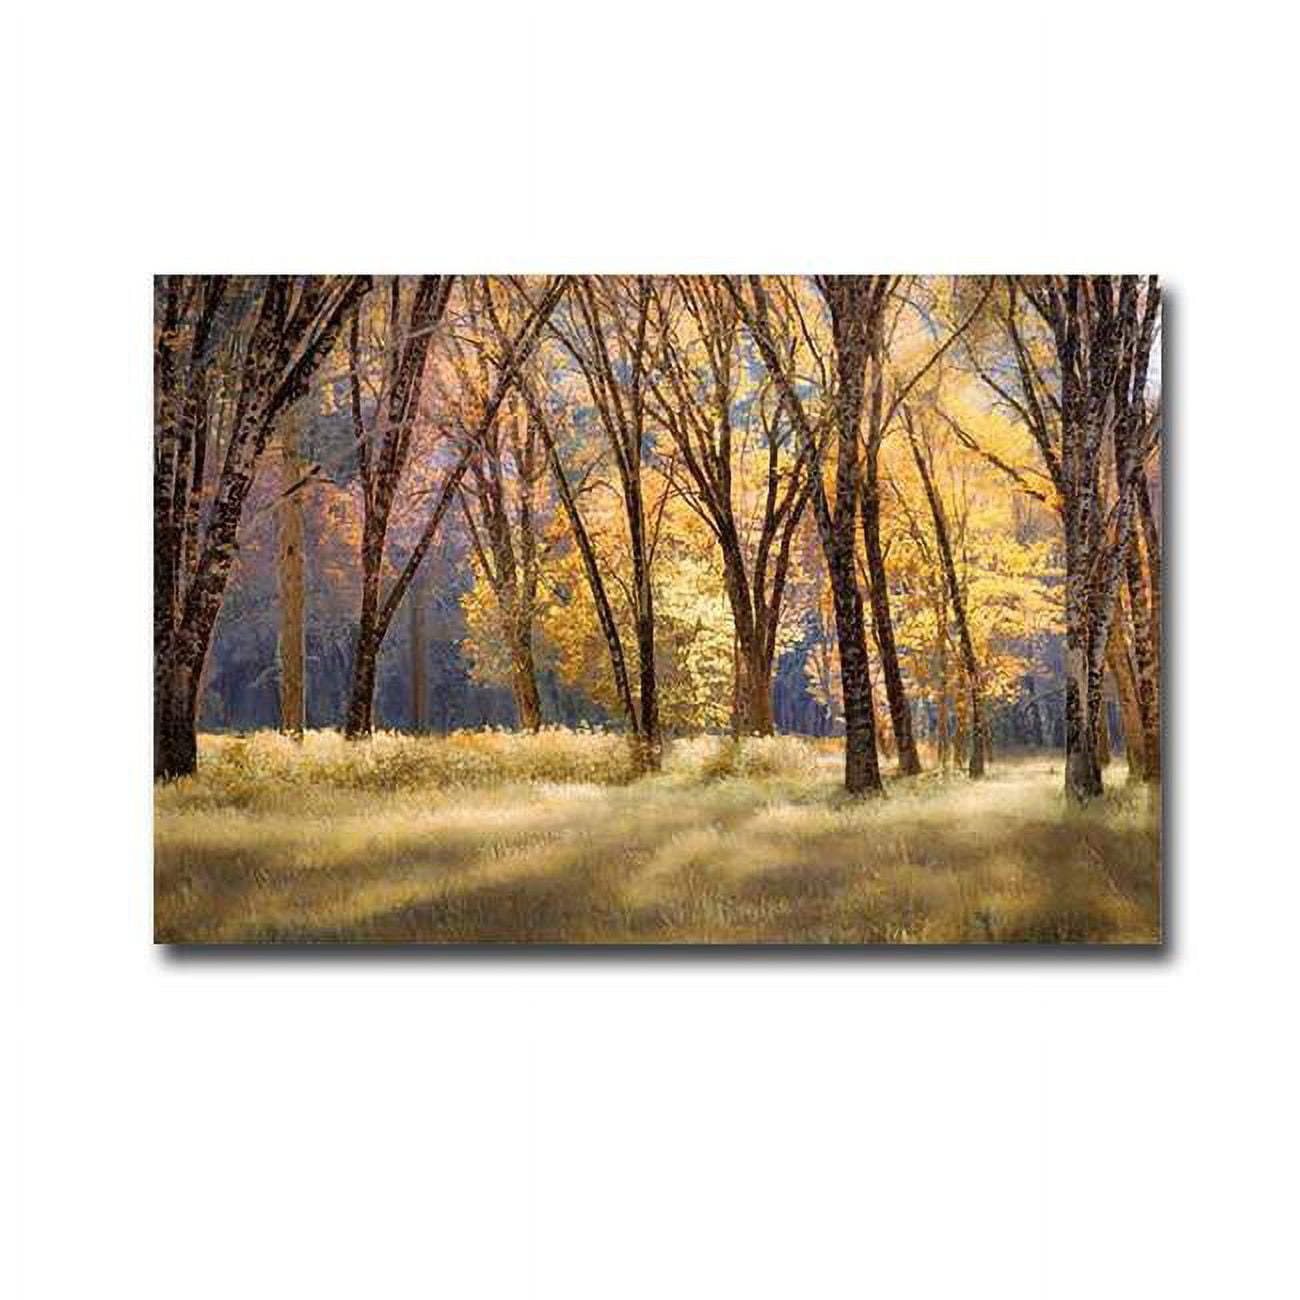 El Capitan Meadow By Fred Mertz Premium Gallery-wrapped Canvas Giclee Art - 16 X 24 X 1.5 In.